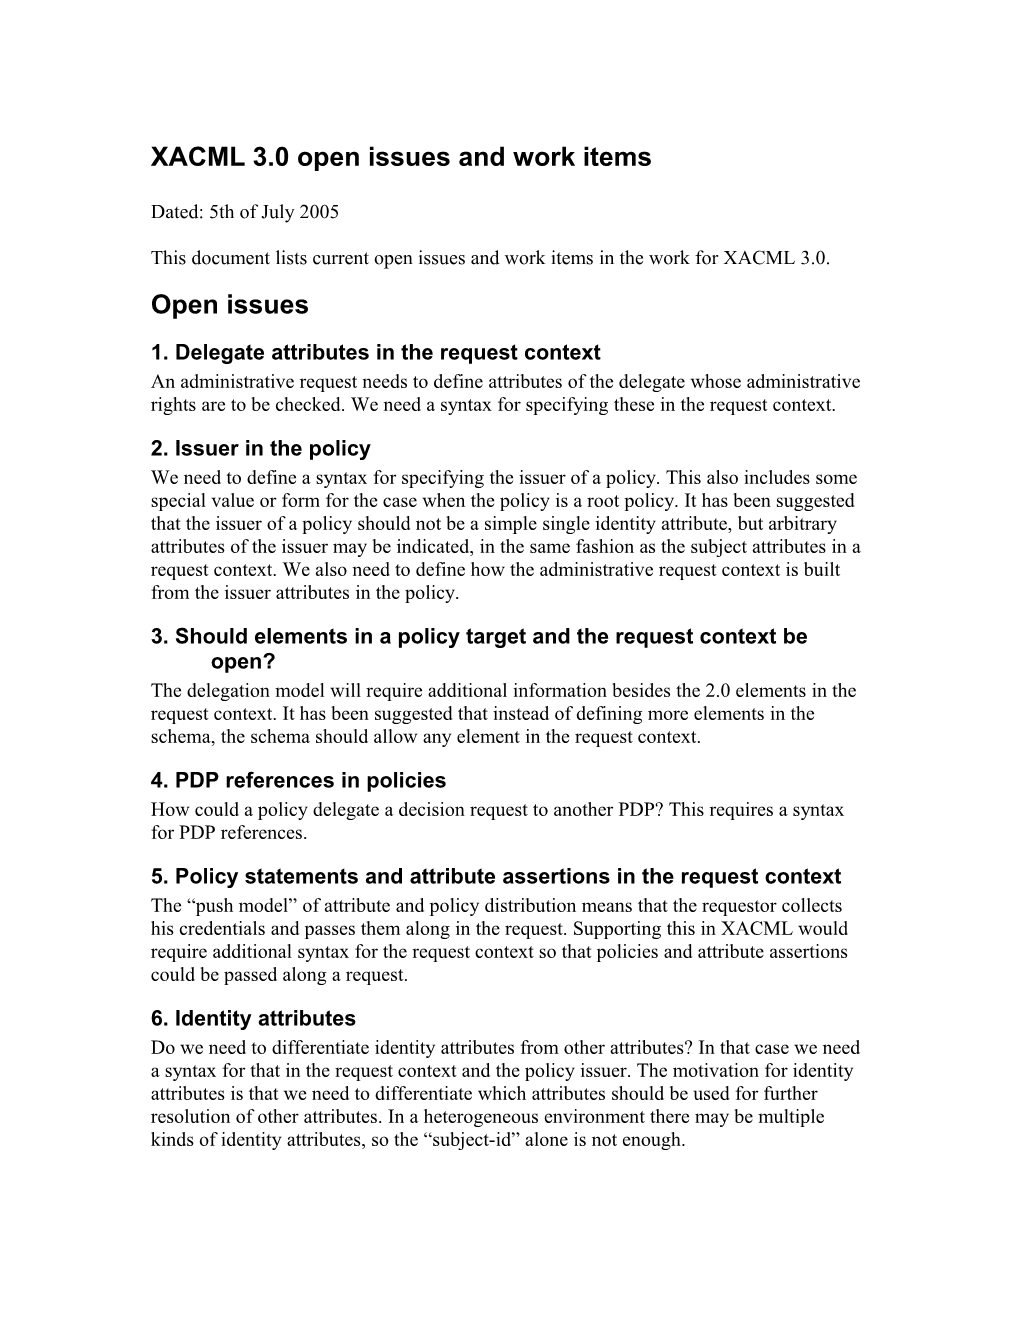 XACML 3.0 Open Issues and Work Items